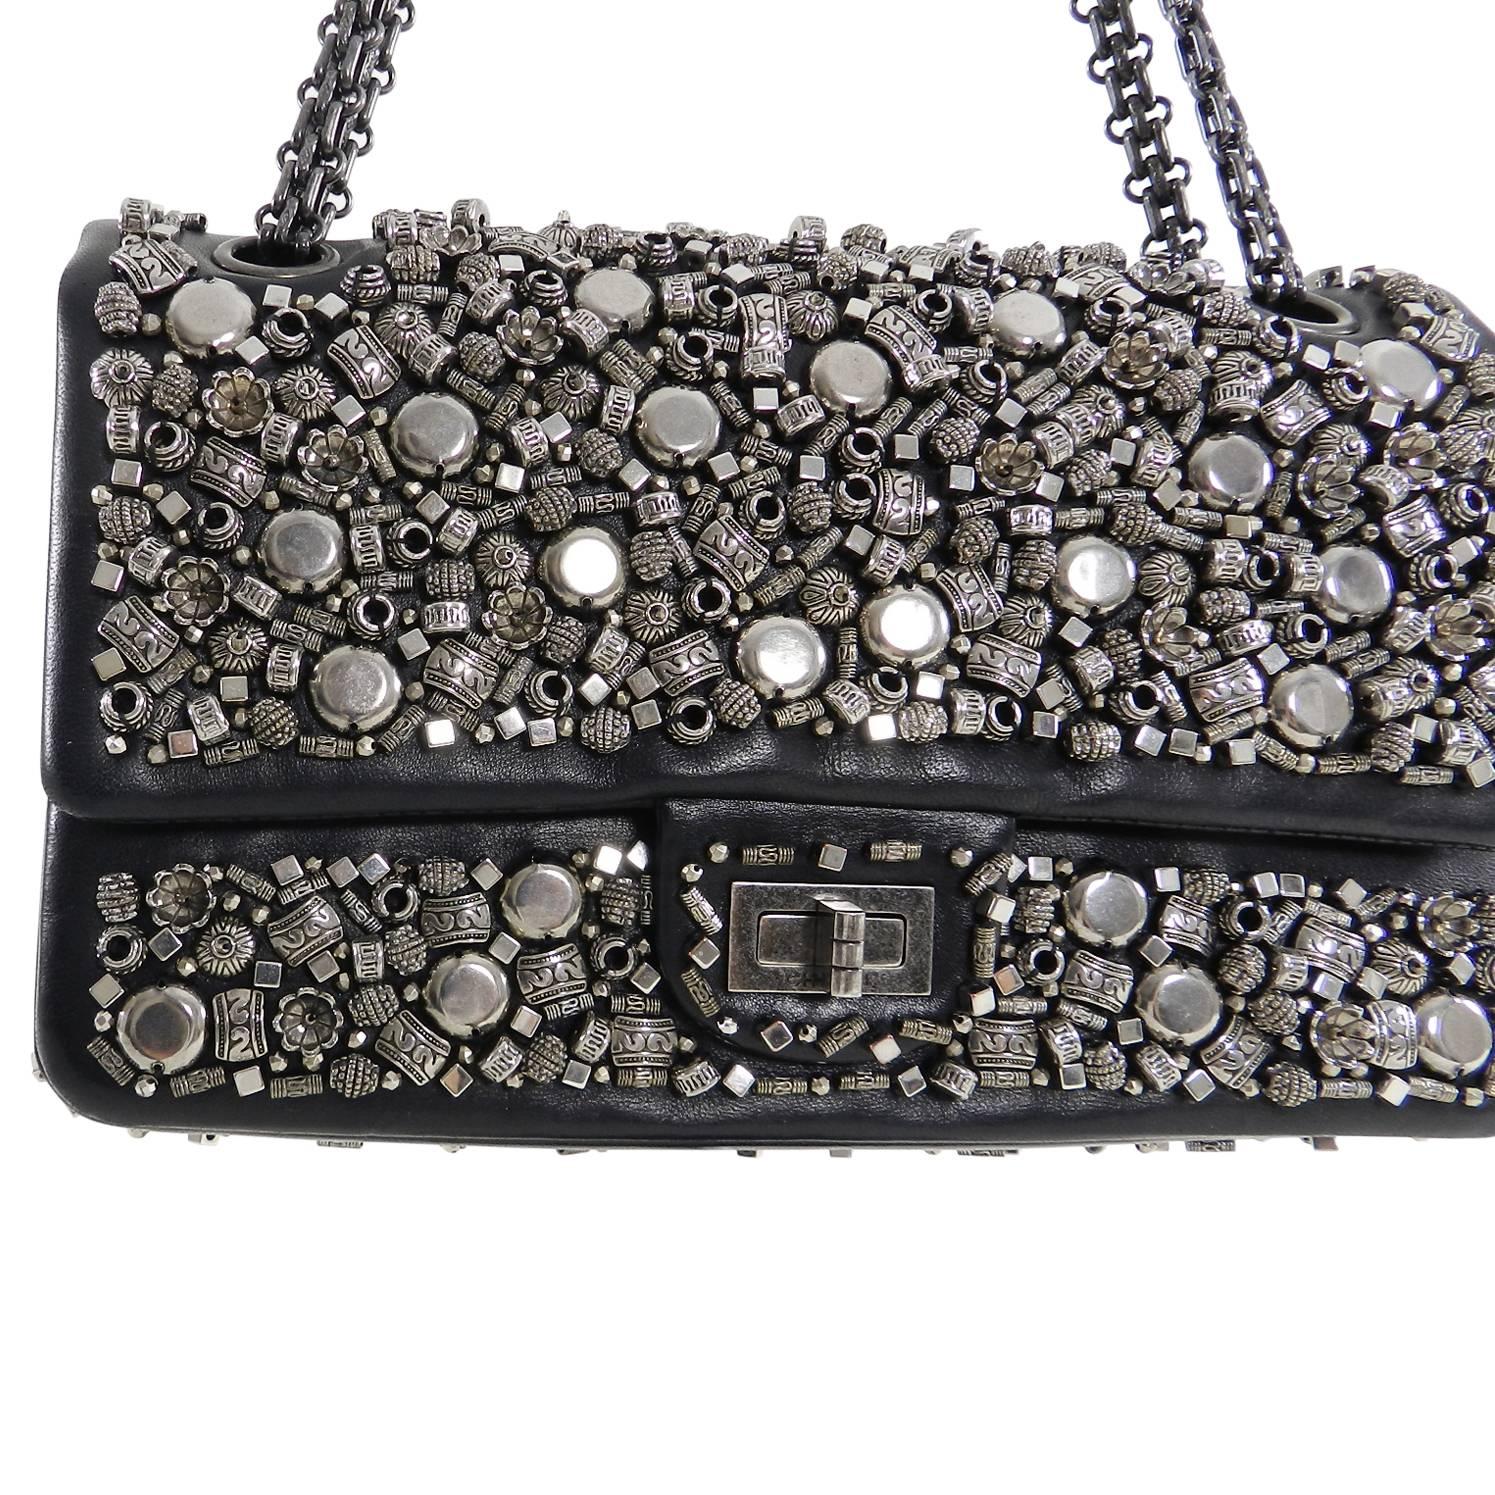 Chanel 2012 pre-fall Bombay collection runway bag. Limited edition and hard to find.  Black soft lambskin leather with silver beaded detailing and gunmetal colored mademoiselle chain. 2.55 re-issue in medium (9.5 x 6 x 3